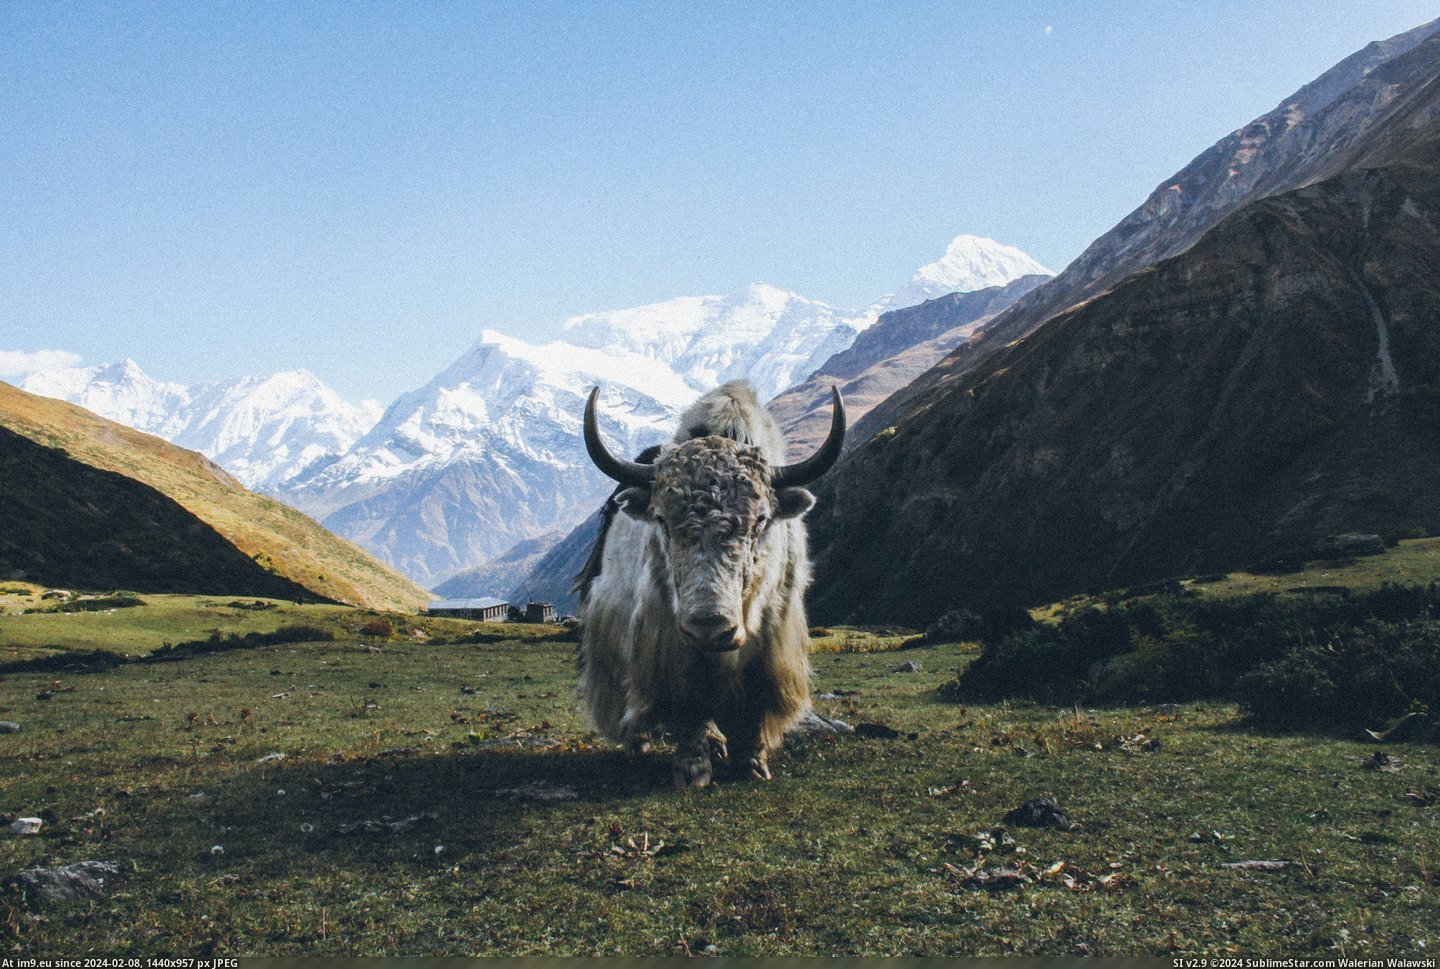  #Nepal  [Pics] A Yak in Nepal. Pic. (Image of album My r/PICS favs))